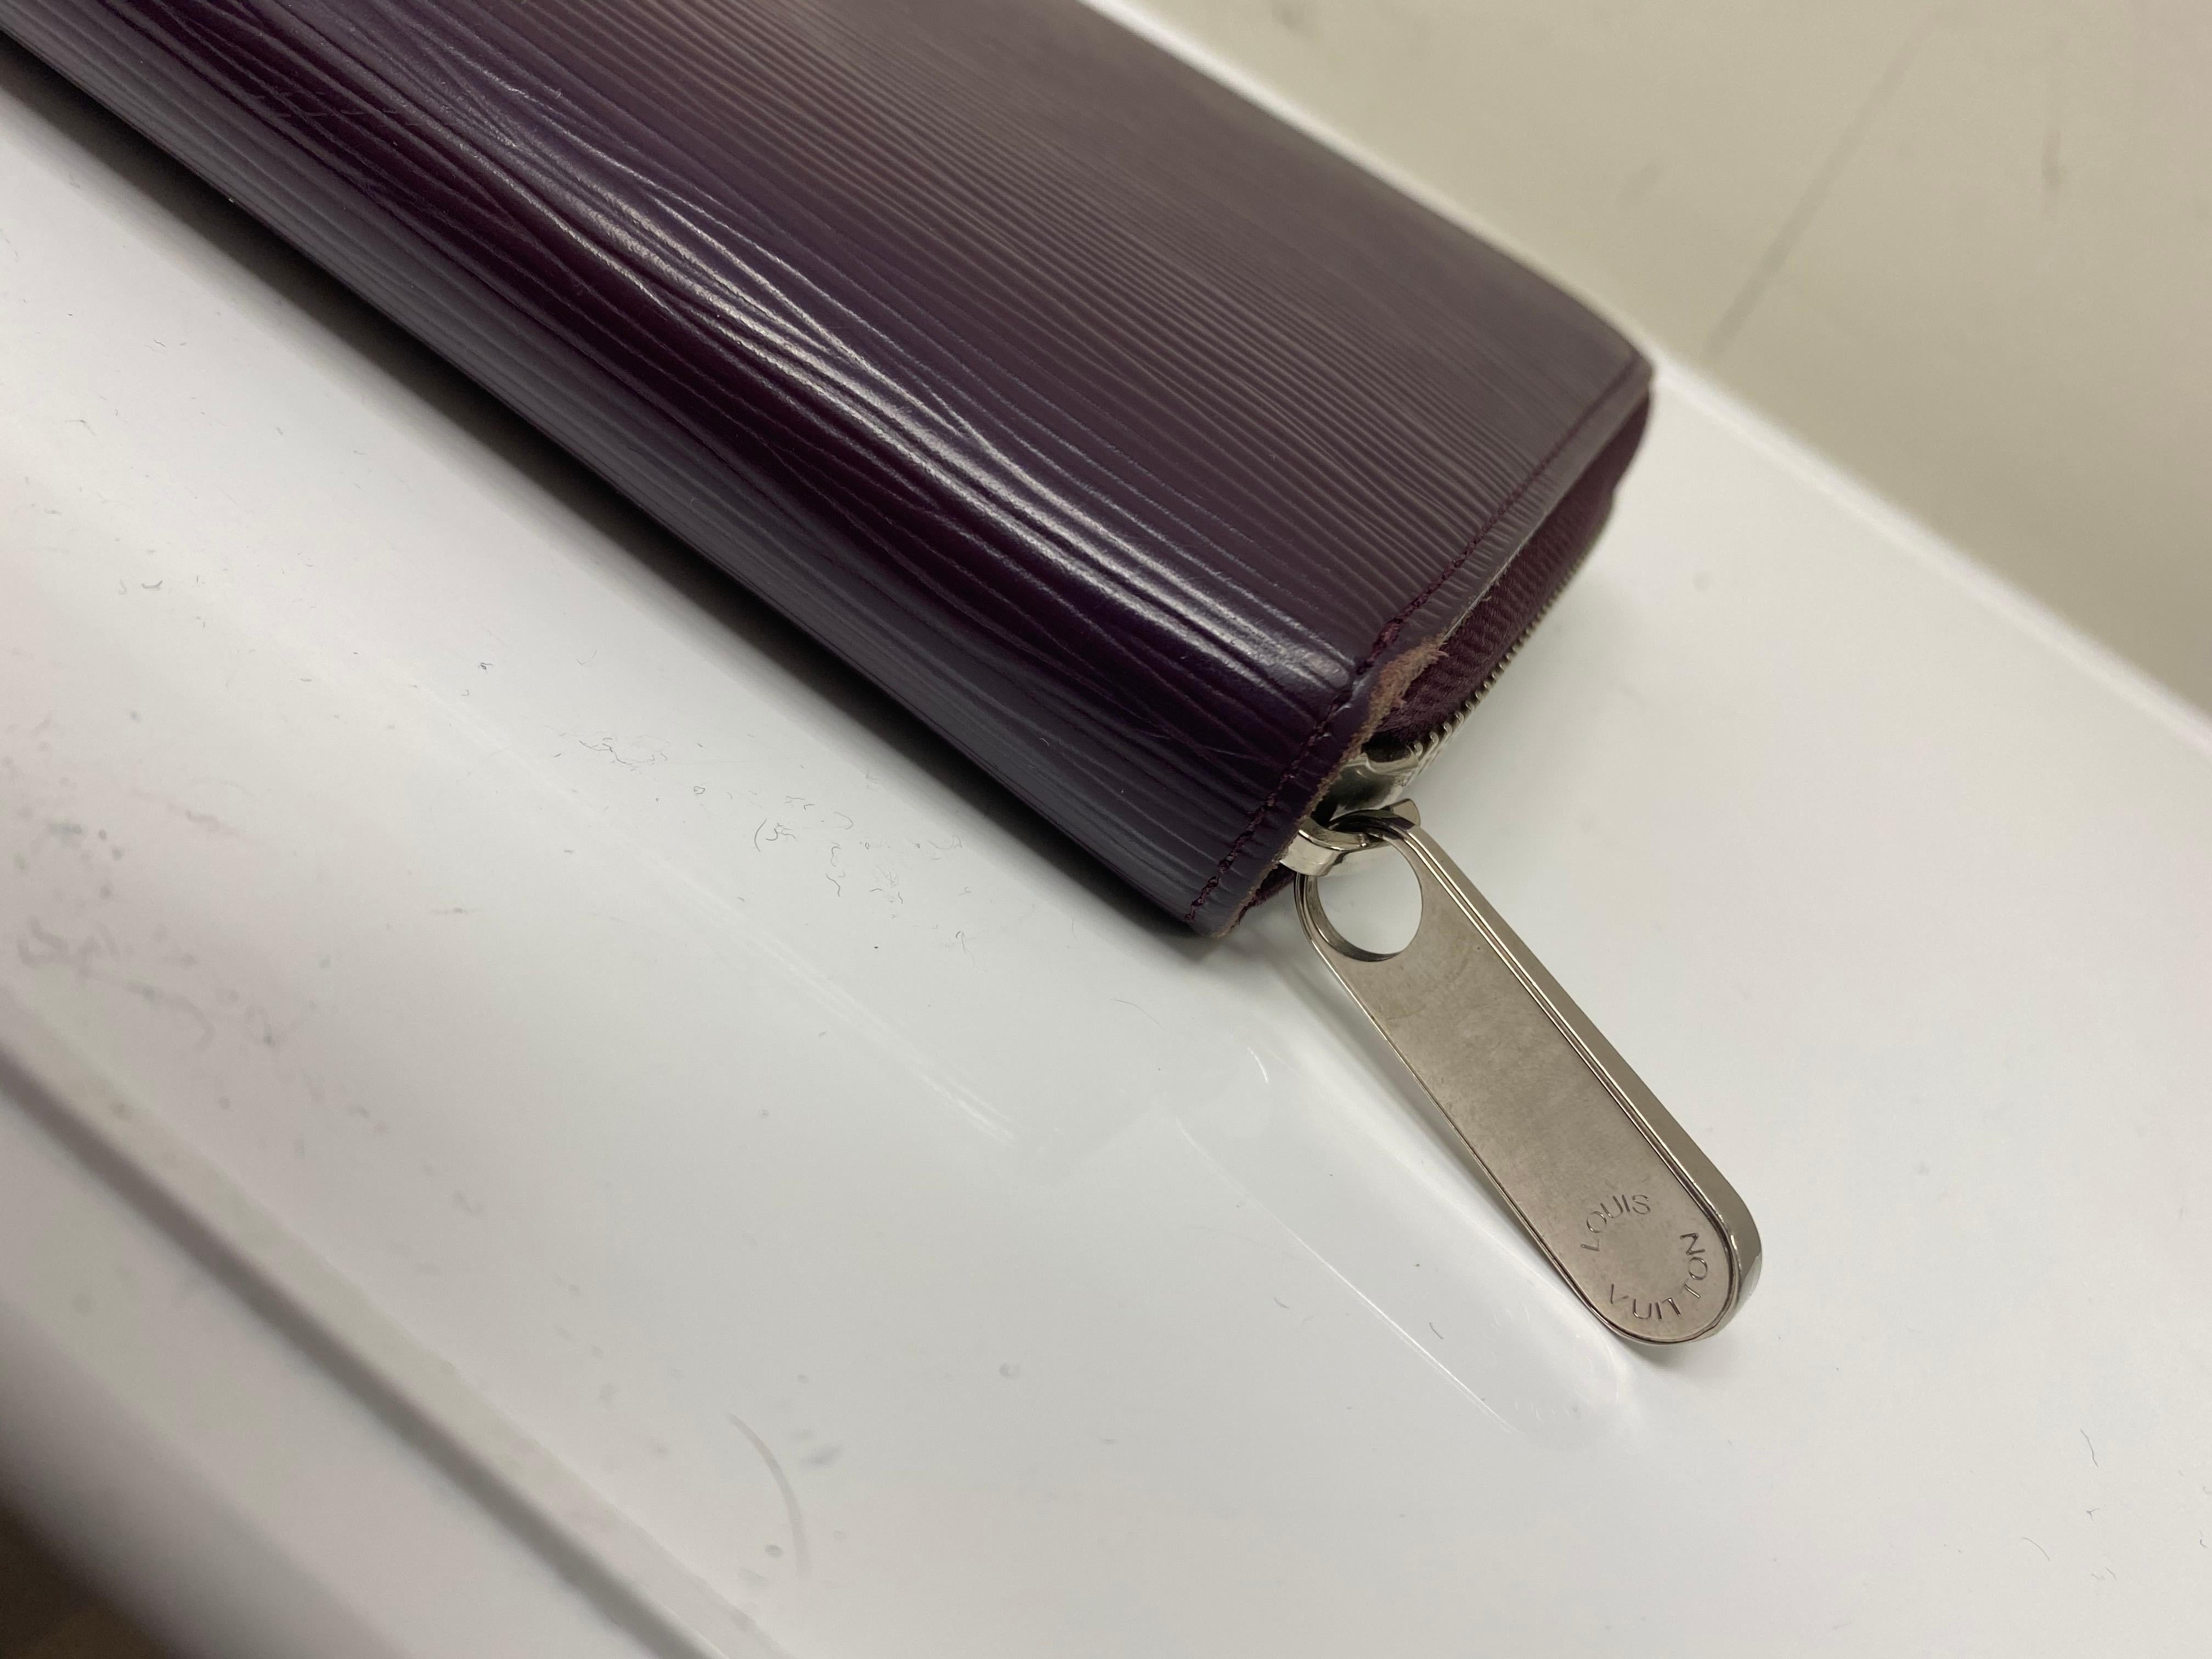 Louis Vuitton Epi Zippy Wallet In Good Condition For Sale In Roslyn, NY